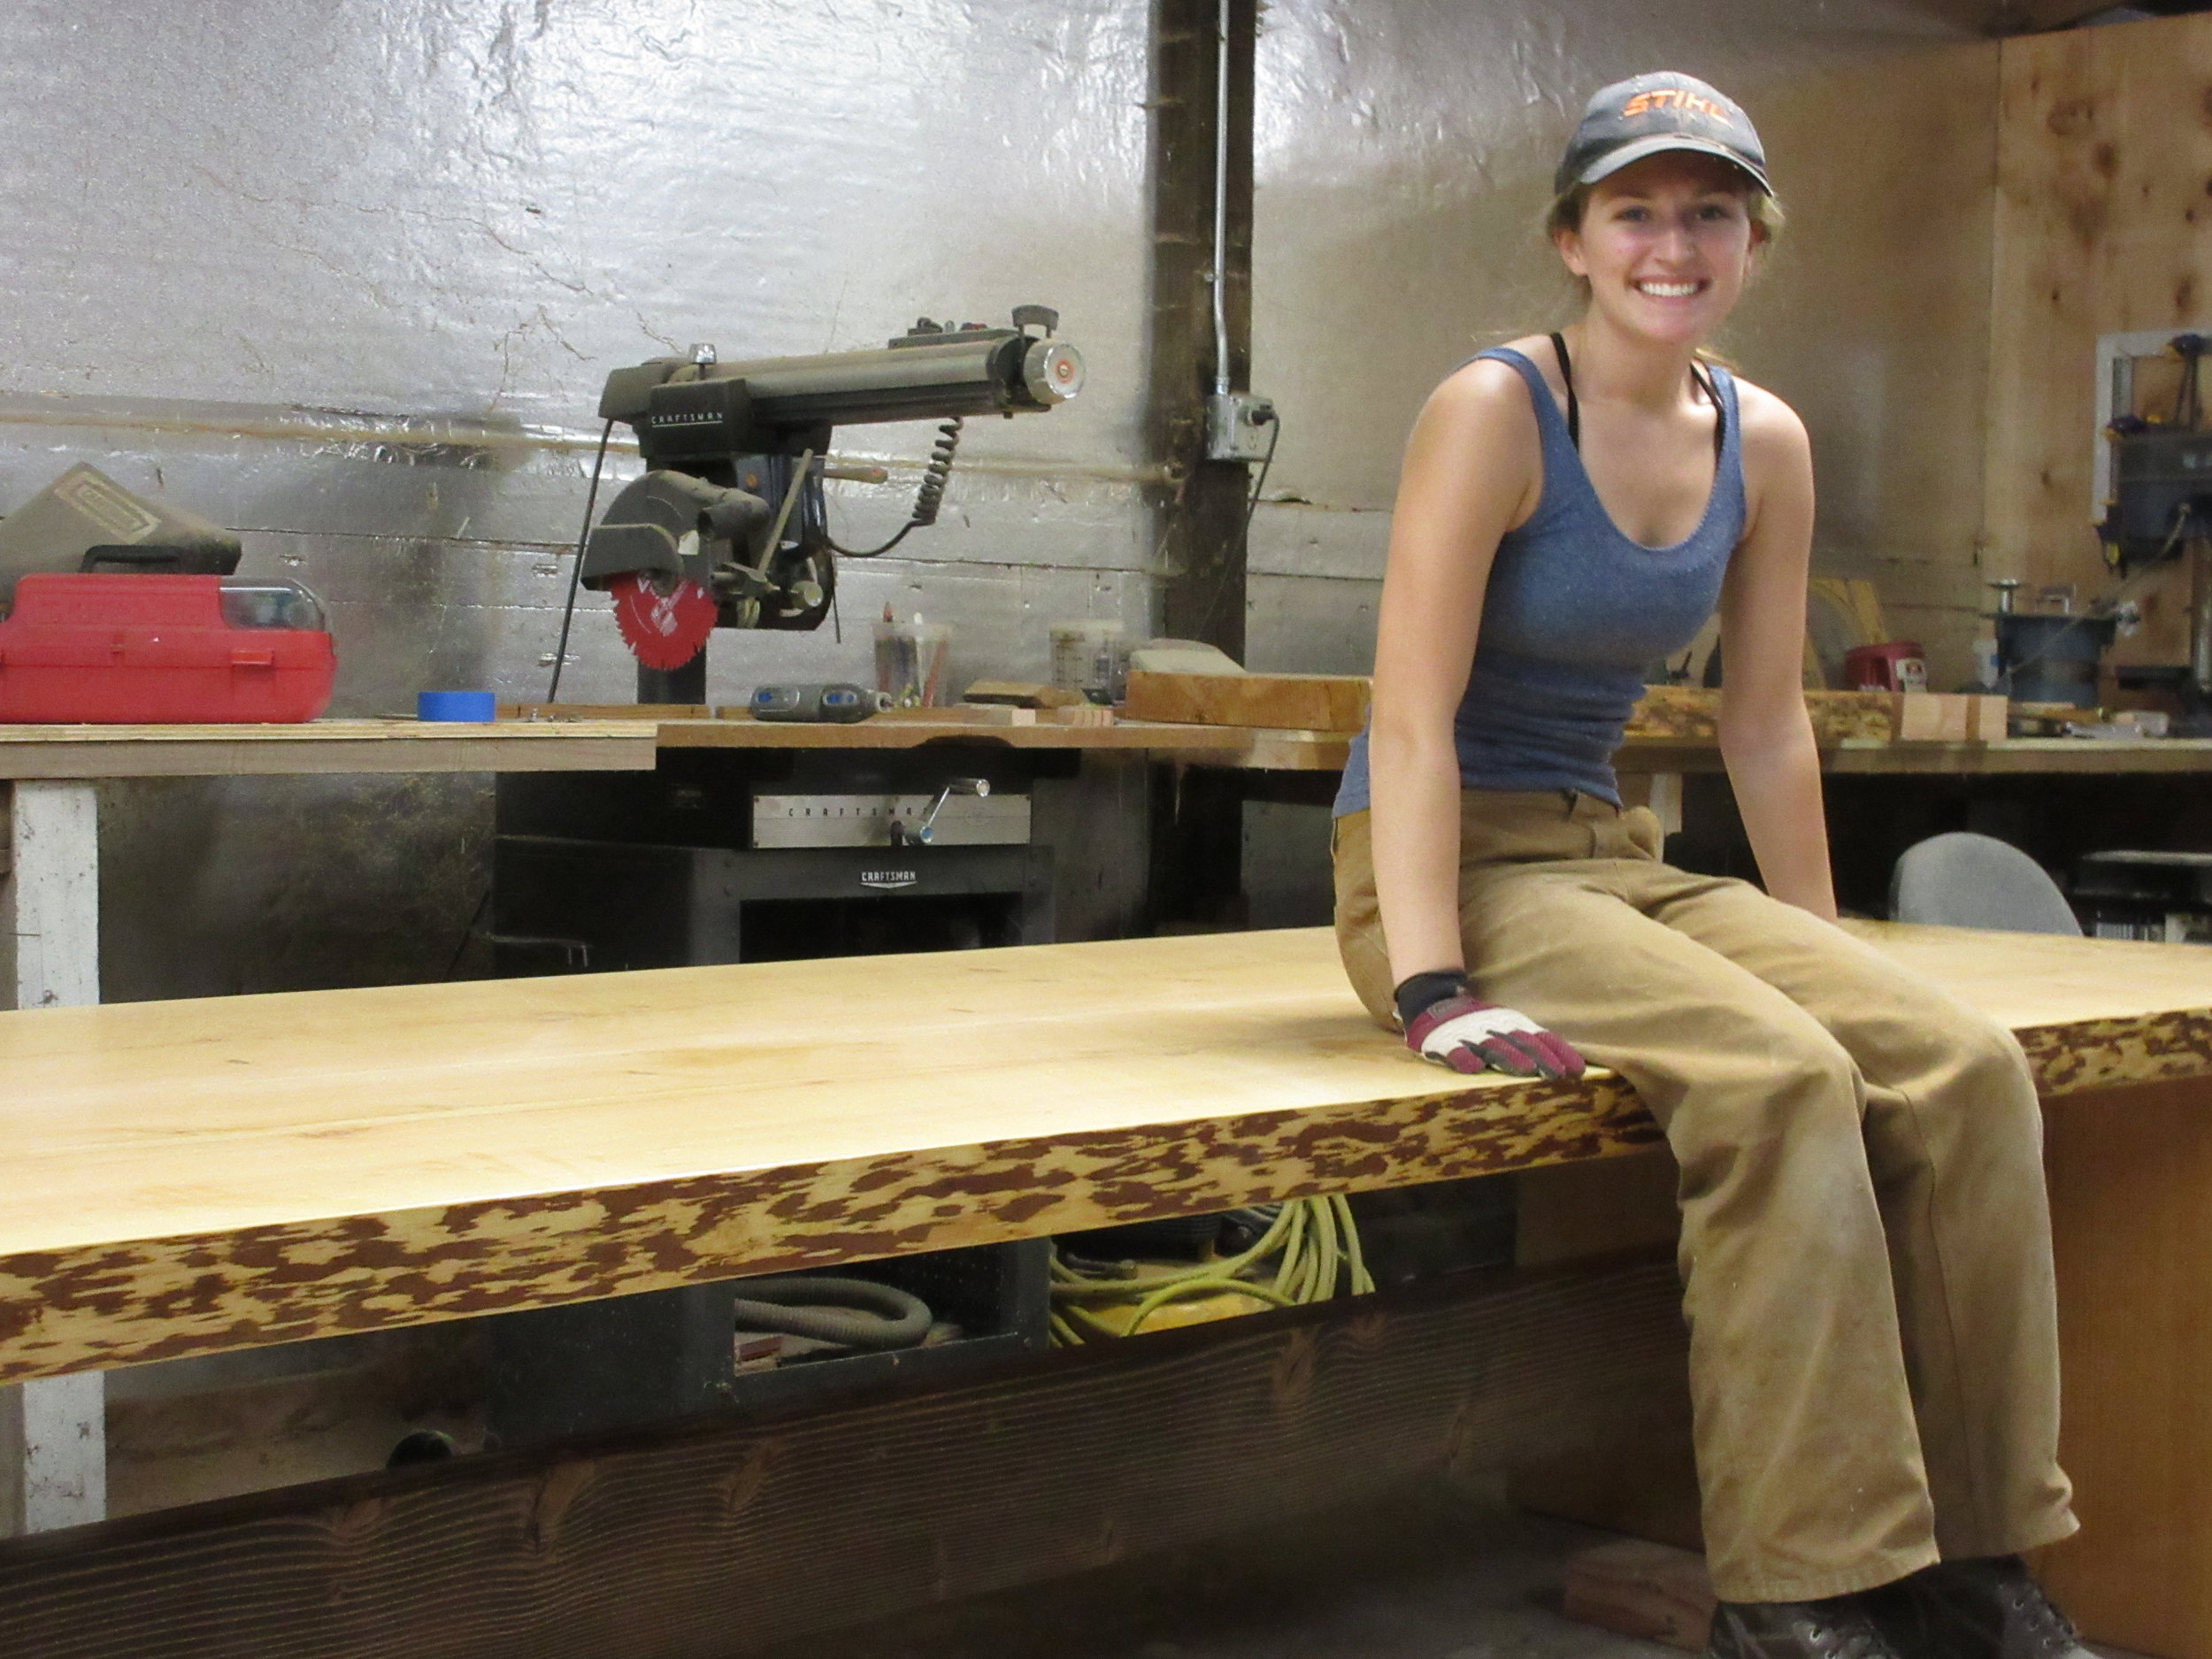  WE assembled the conference table for the first time in our shop the day before we delivered it. When we finished, dad and I just started laughing and high-fiving! We couldn't beleive that we had really done it! It was a moment that I will never for